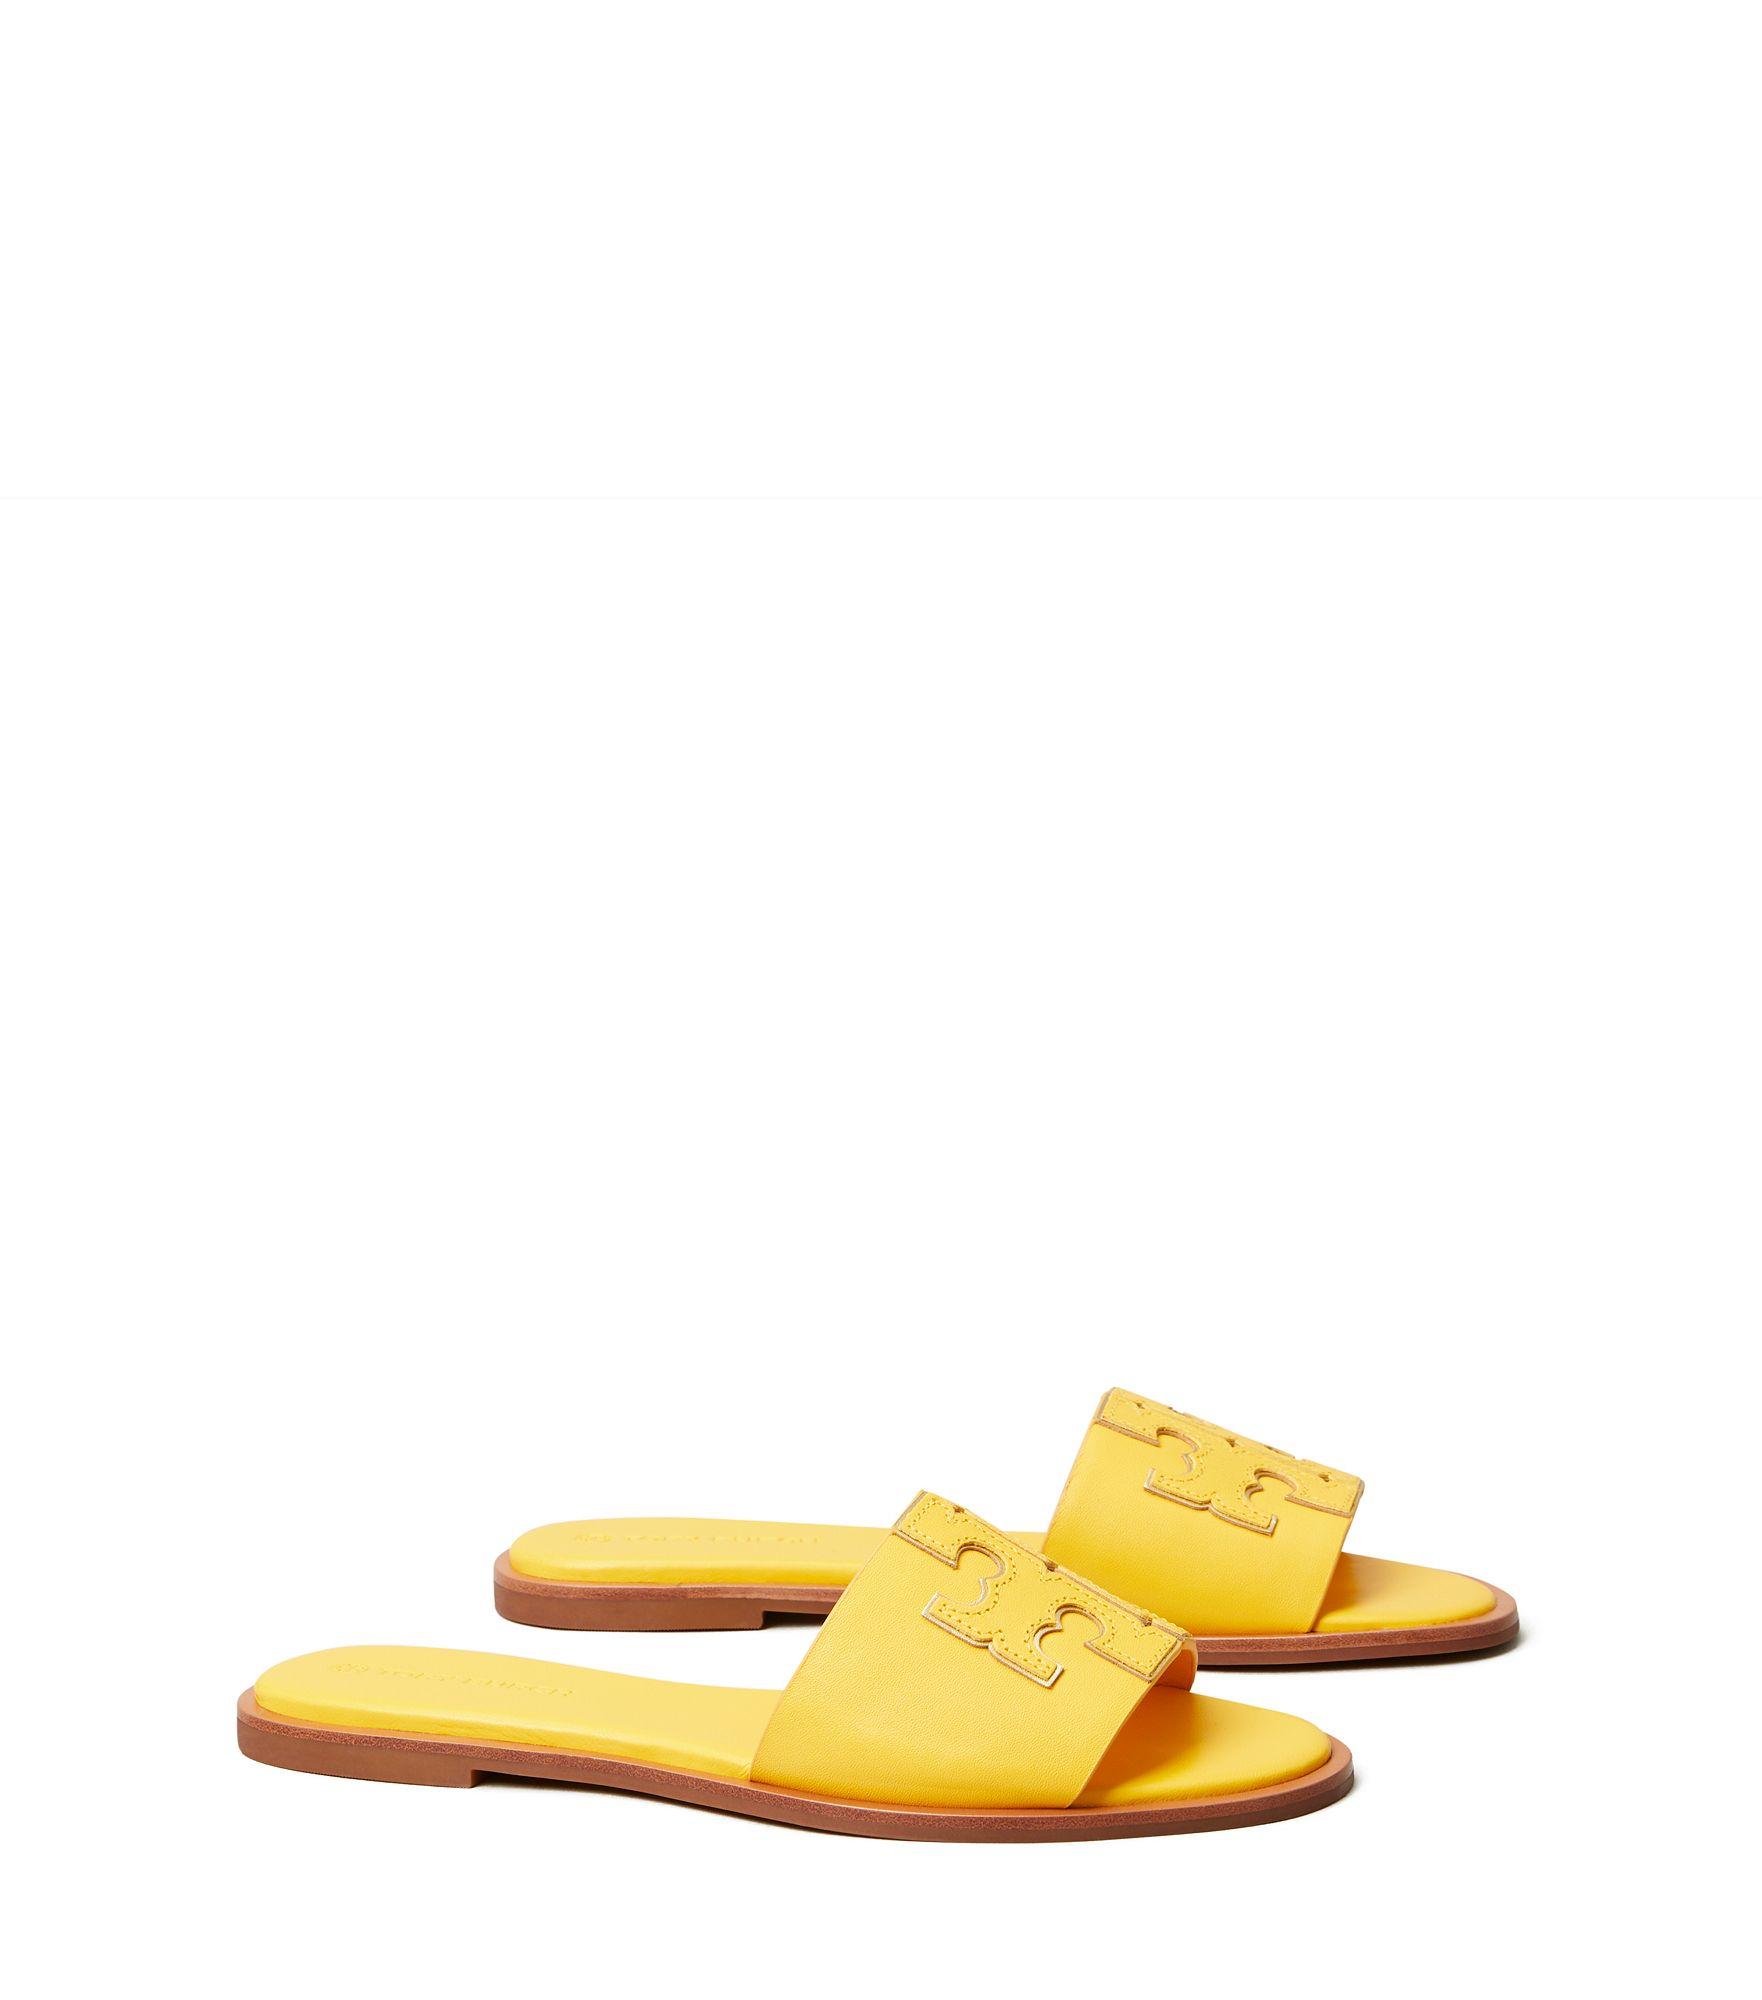 Tory Burch Ines Slide in Yellow | Lyst